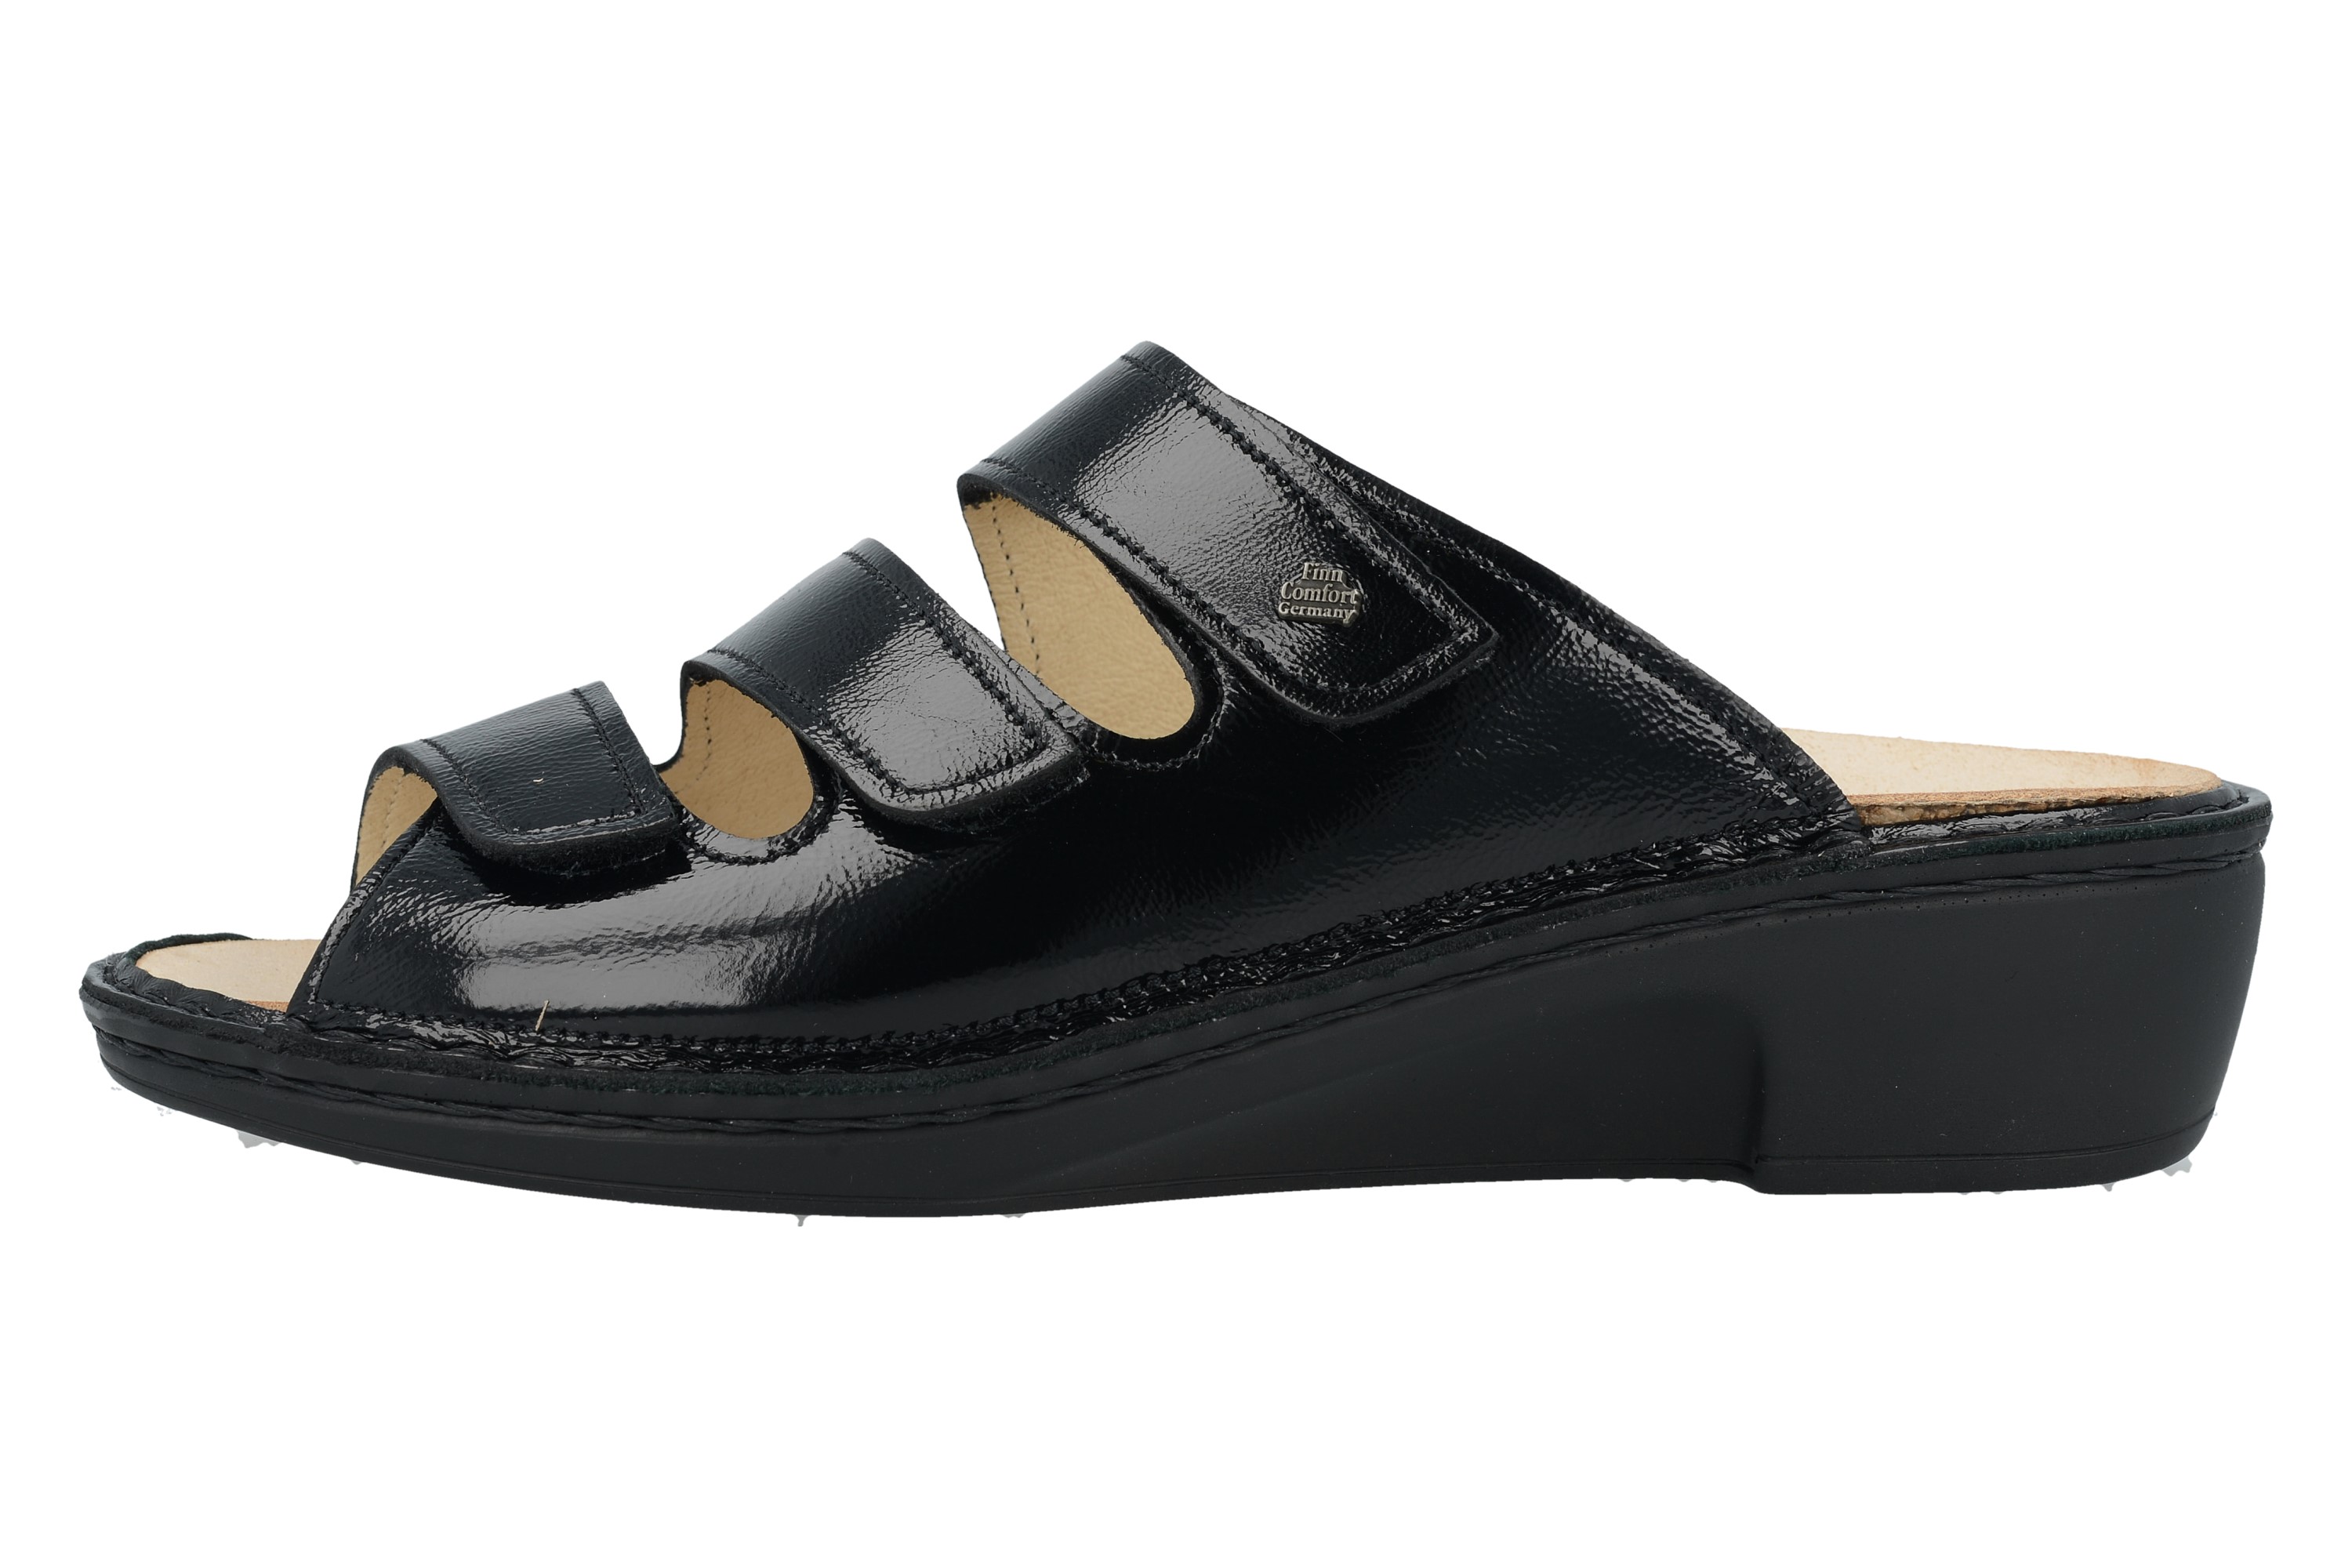 Canzo - Black Patent leather